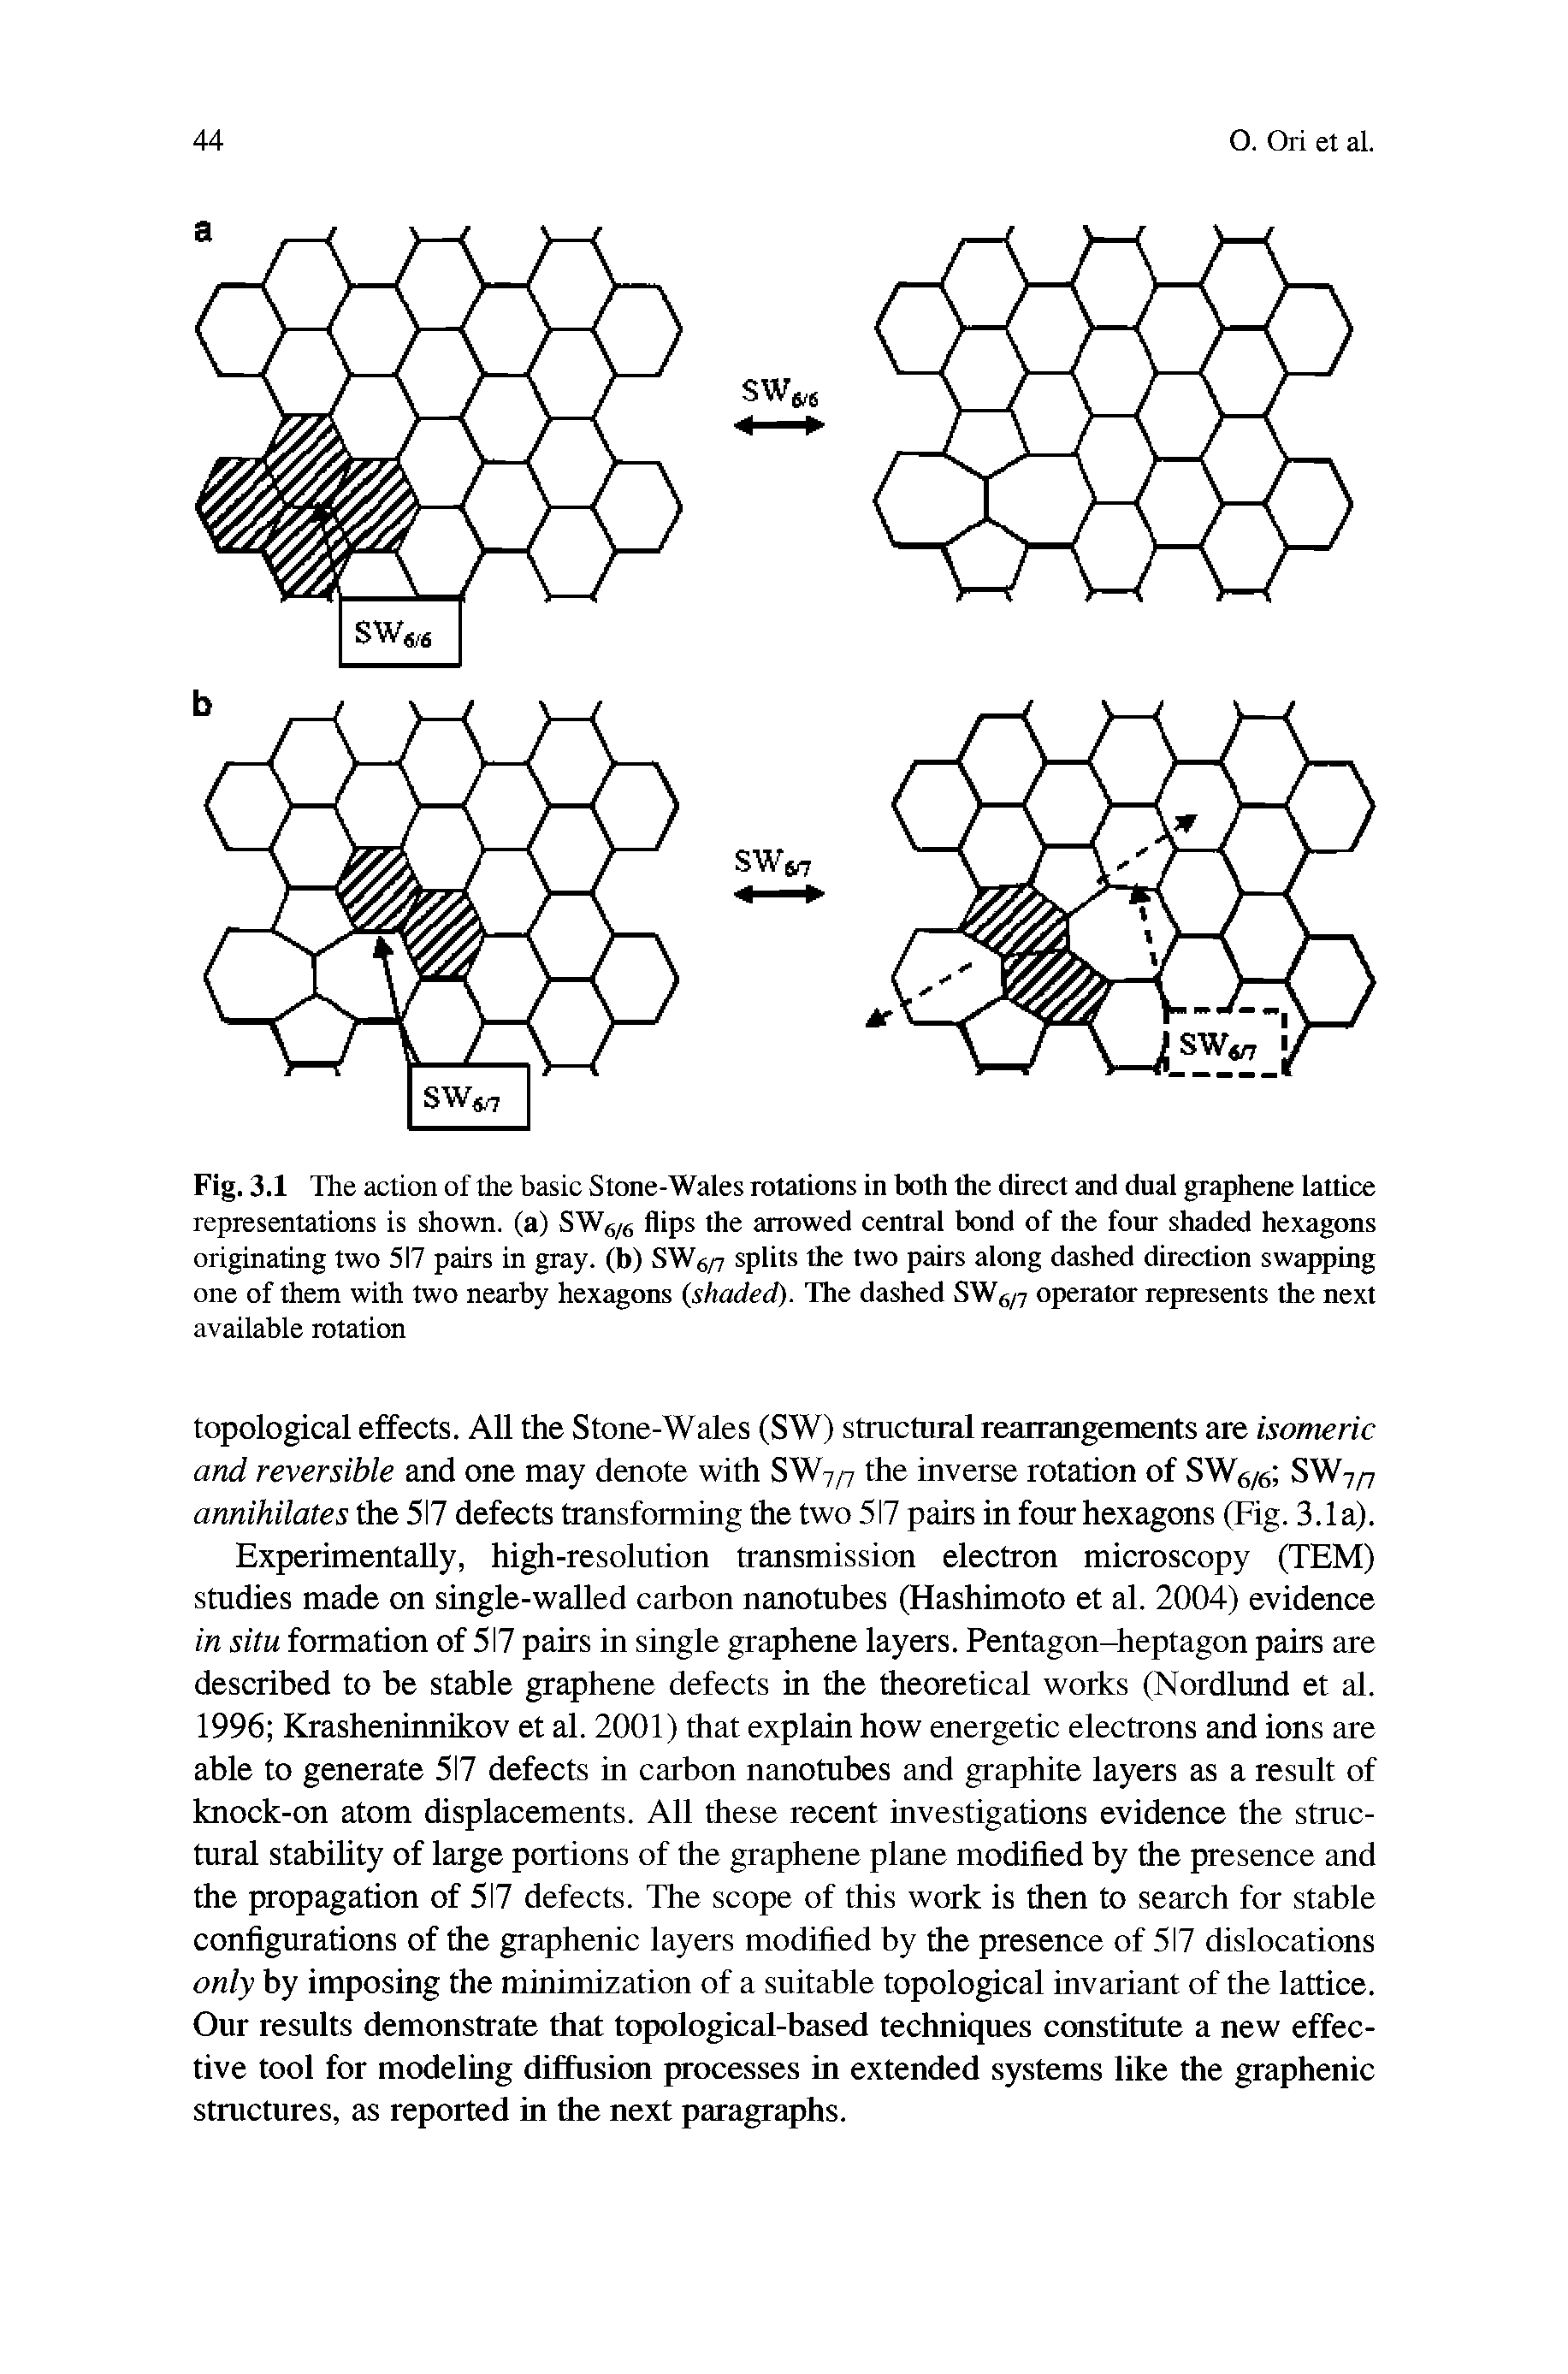 Fig. 3.1 The action of the basic Stone-Wales rotations in both the direct and dual graphene lattice representations is shown, (a) SW g flips the arrowed central bond of the four shaded hexagons originating two 517 pairs in gray, (b) SW /y splits the two pairs along dashed direction swapping one of them with two nearby hexagons (shaded). The dashed SW /y operator represents the next available rotation...